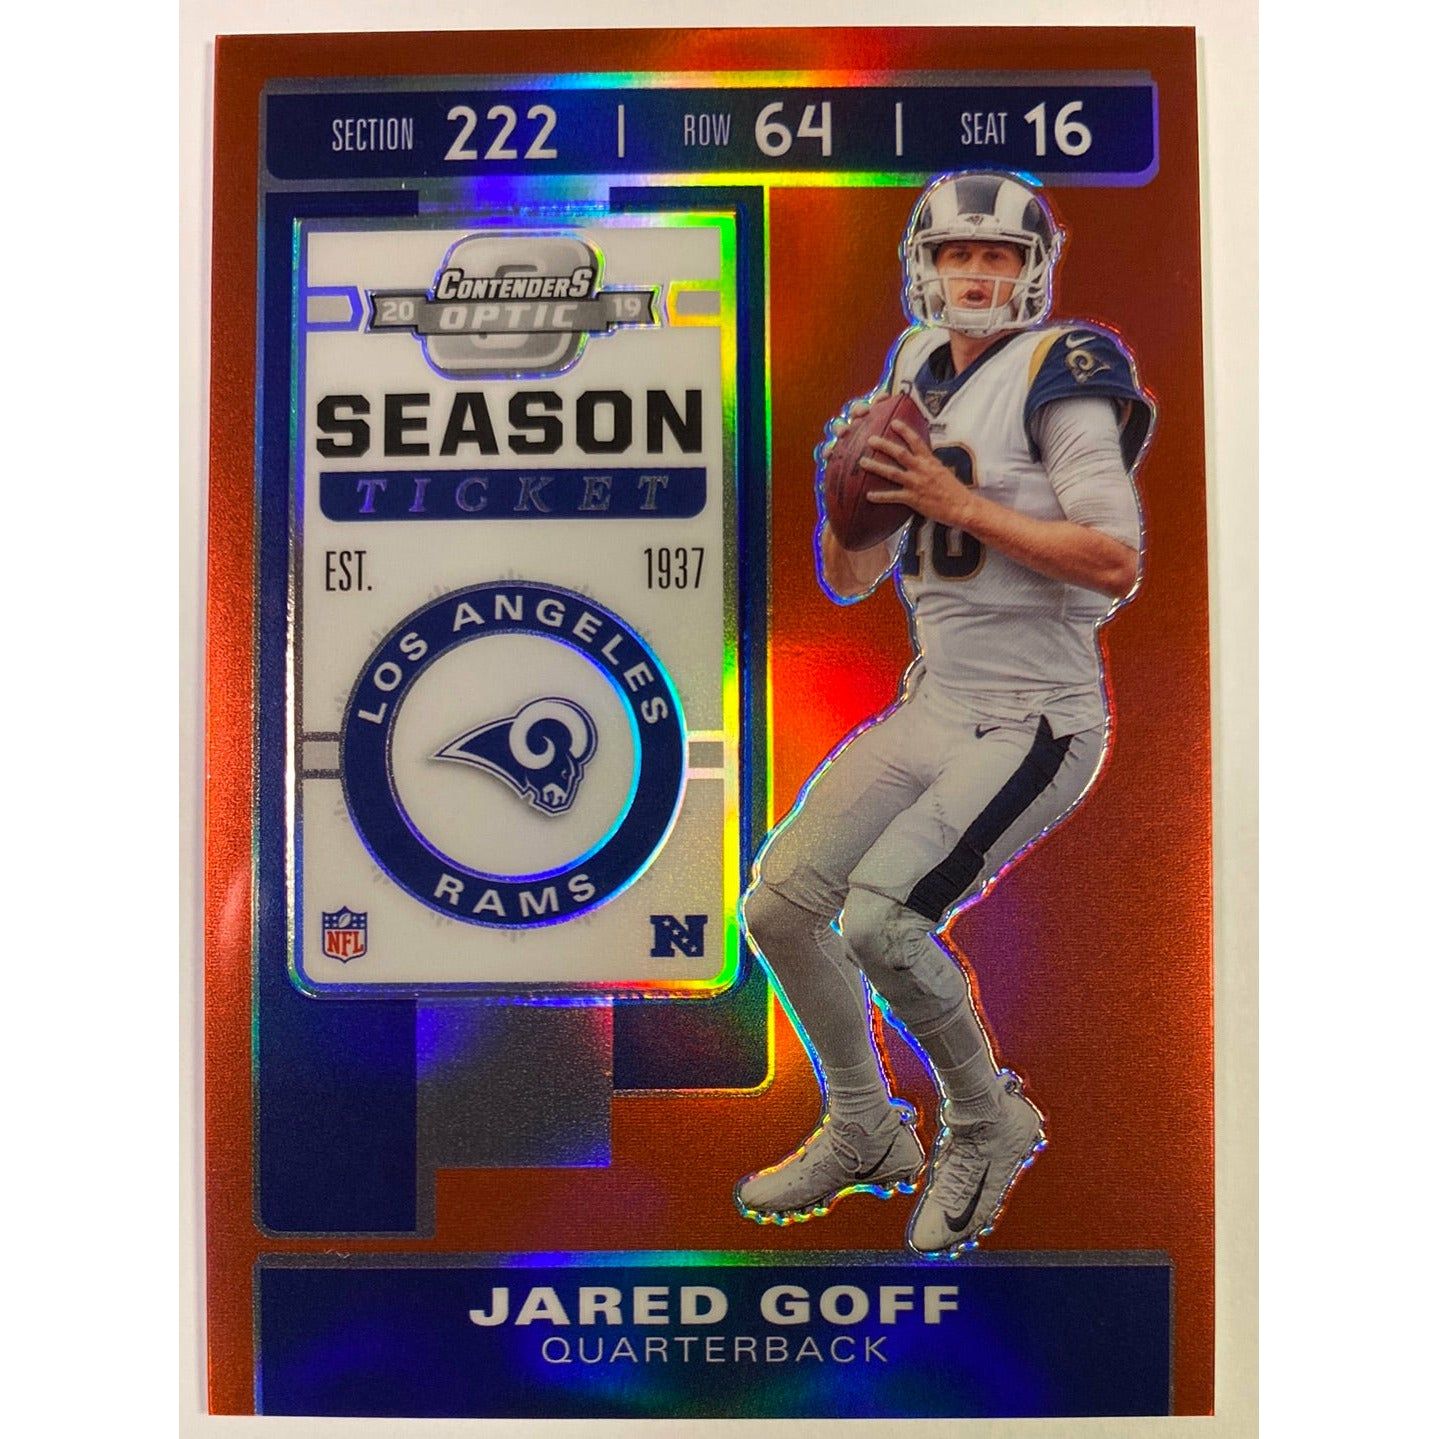  2019 Contenders Optic Jared Goff Red Prizm Season Ticket /199  Local Legends Cards & Collectibles